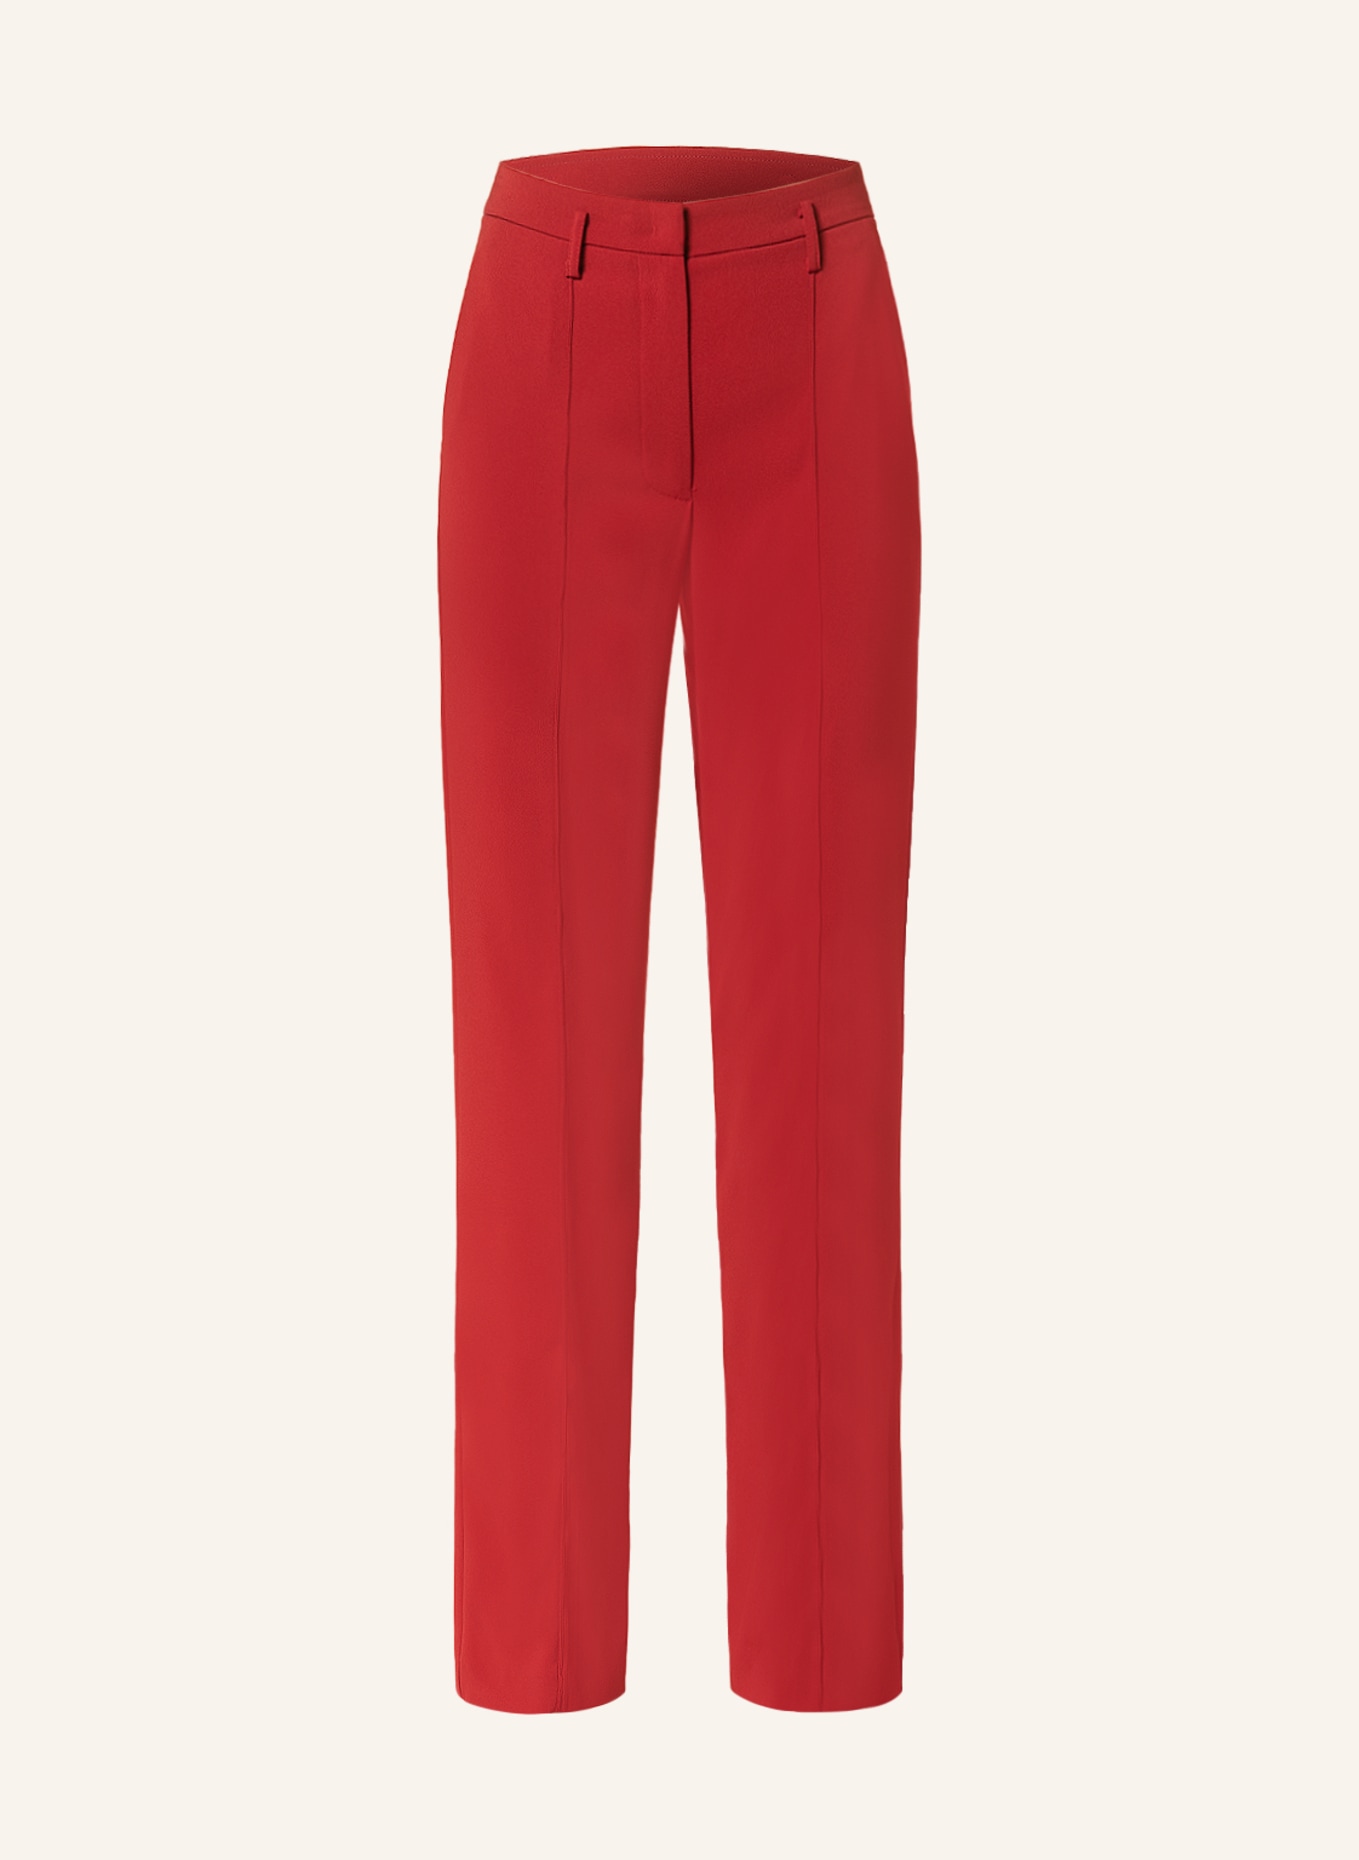 Womens Red Wide Leg Trousers